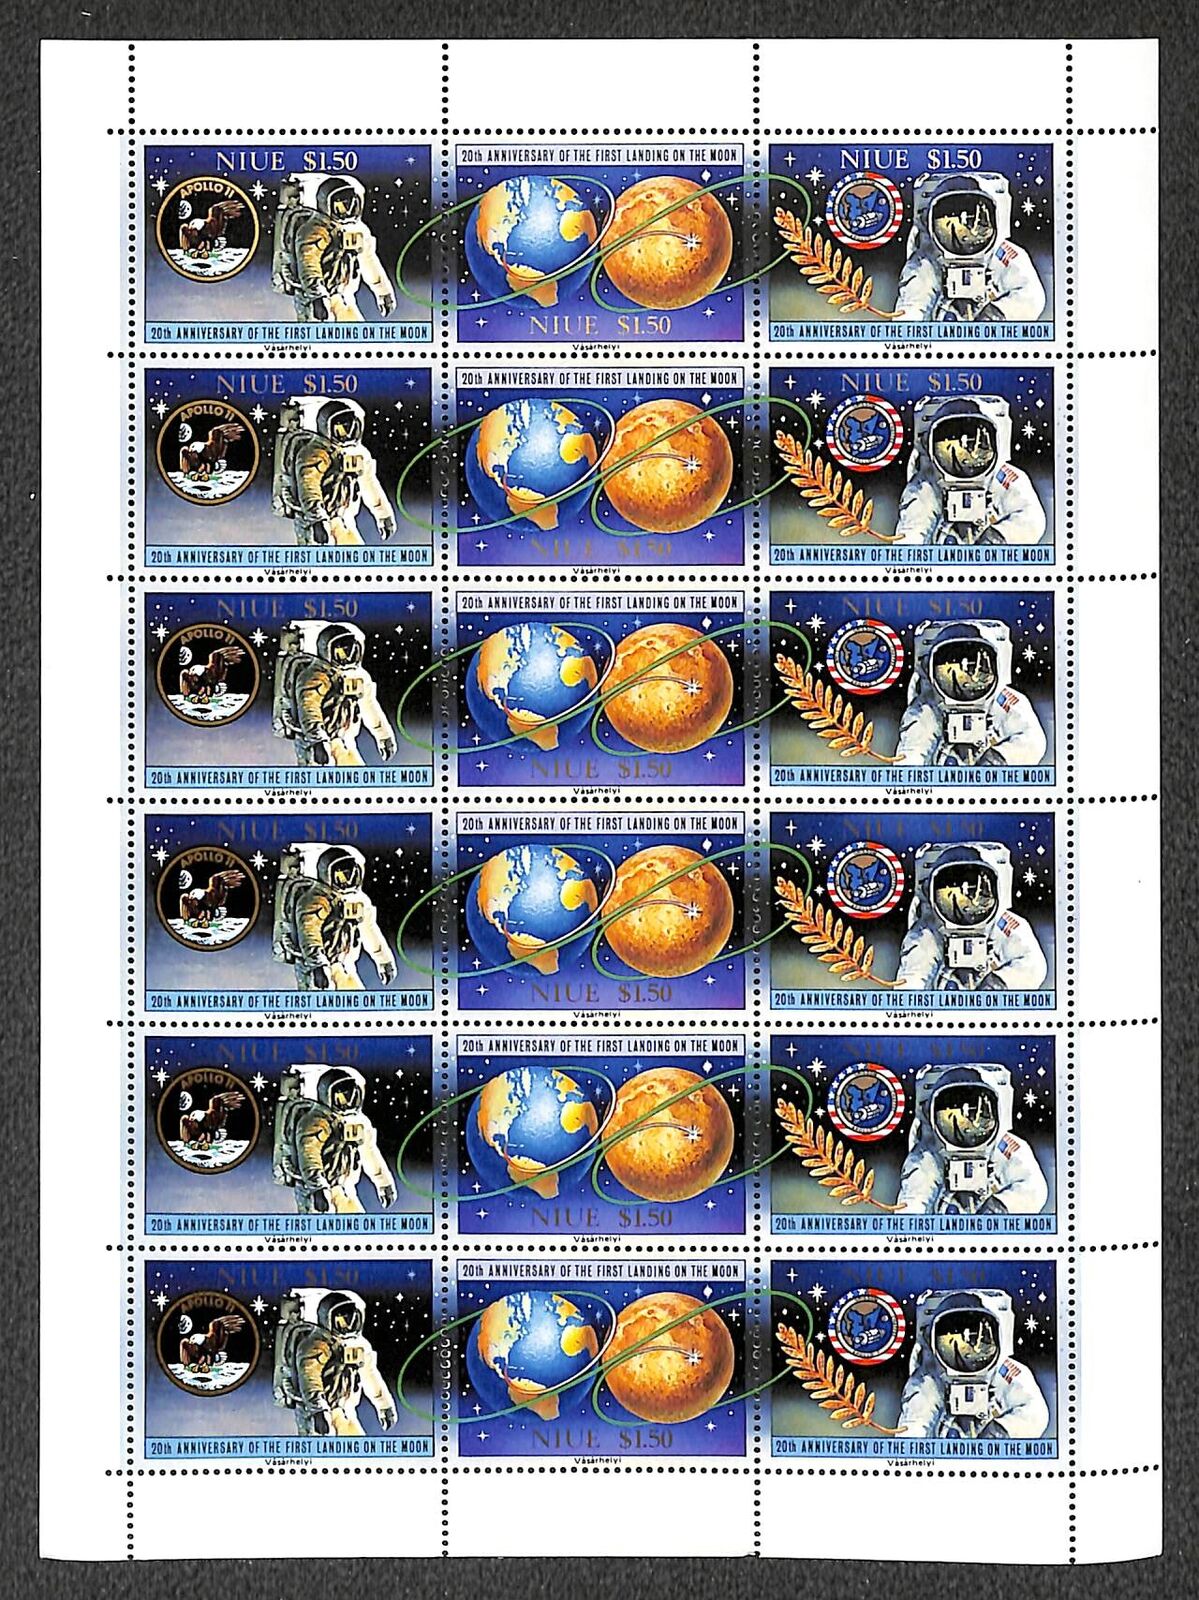 [opg927] Niue 1989 Space Lot Of 6x Very Fine Mnh Sheet